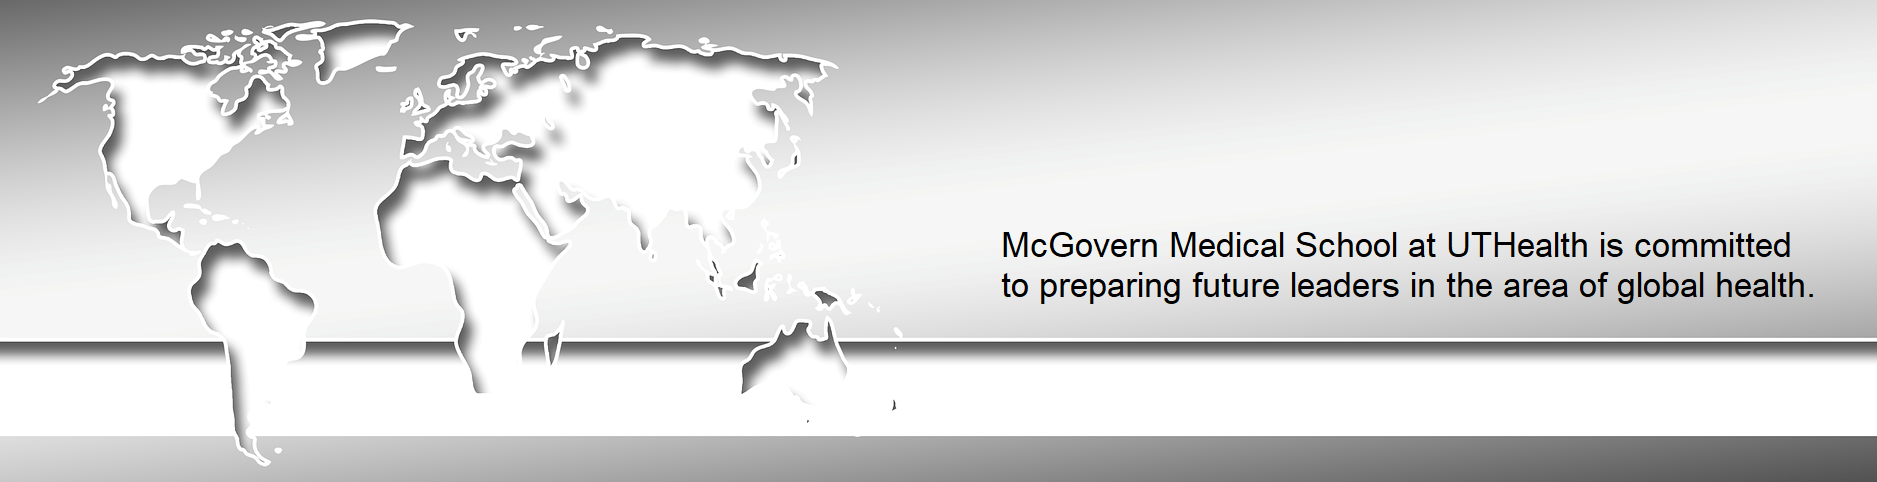 McGovern med is committed to preparing future leaders in the area of global health